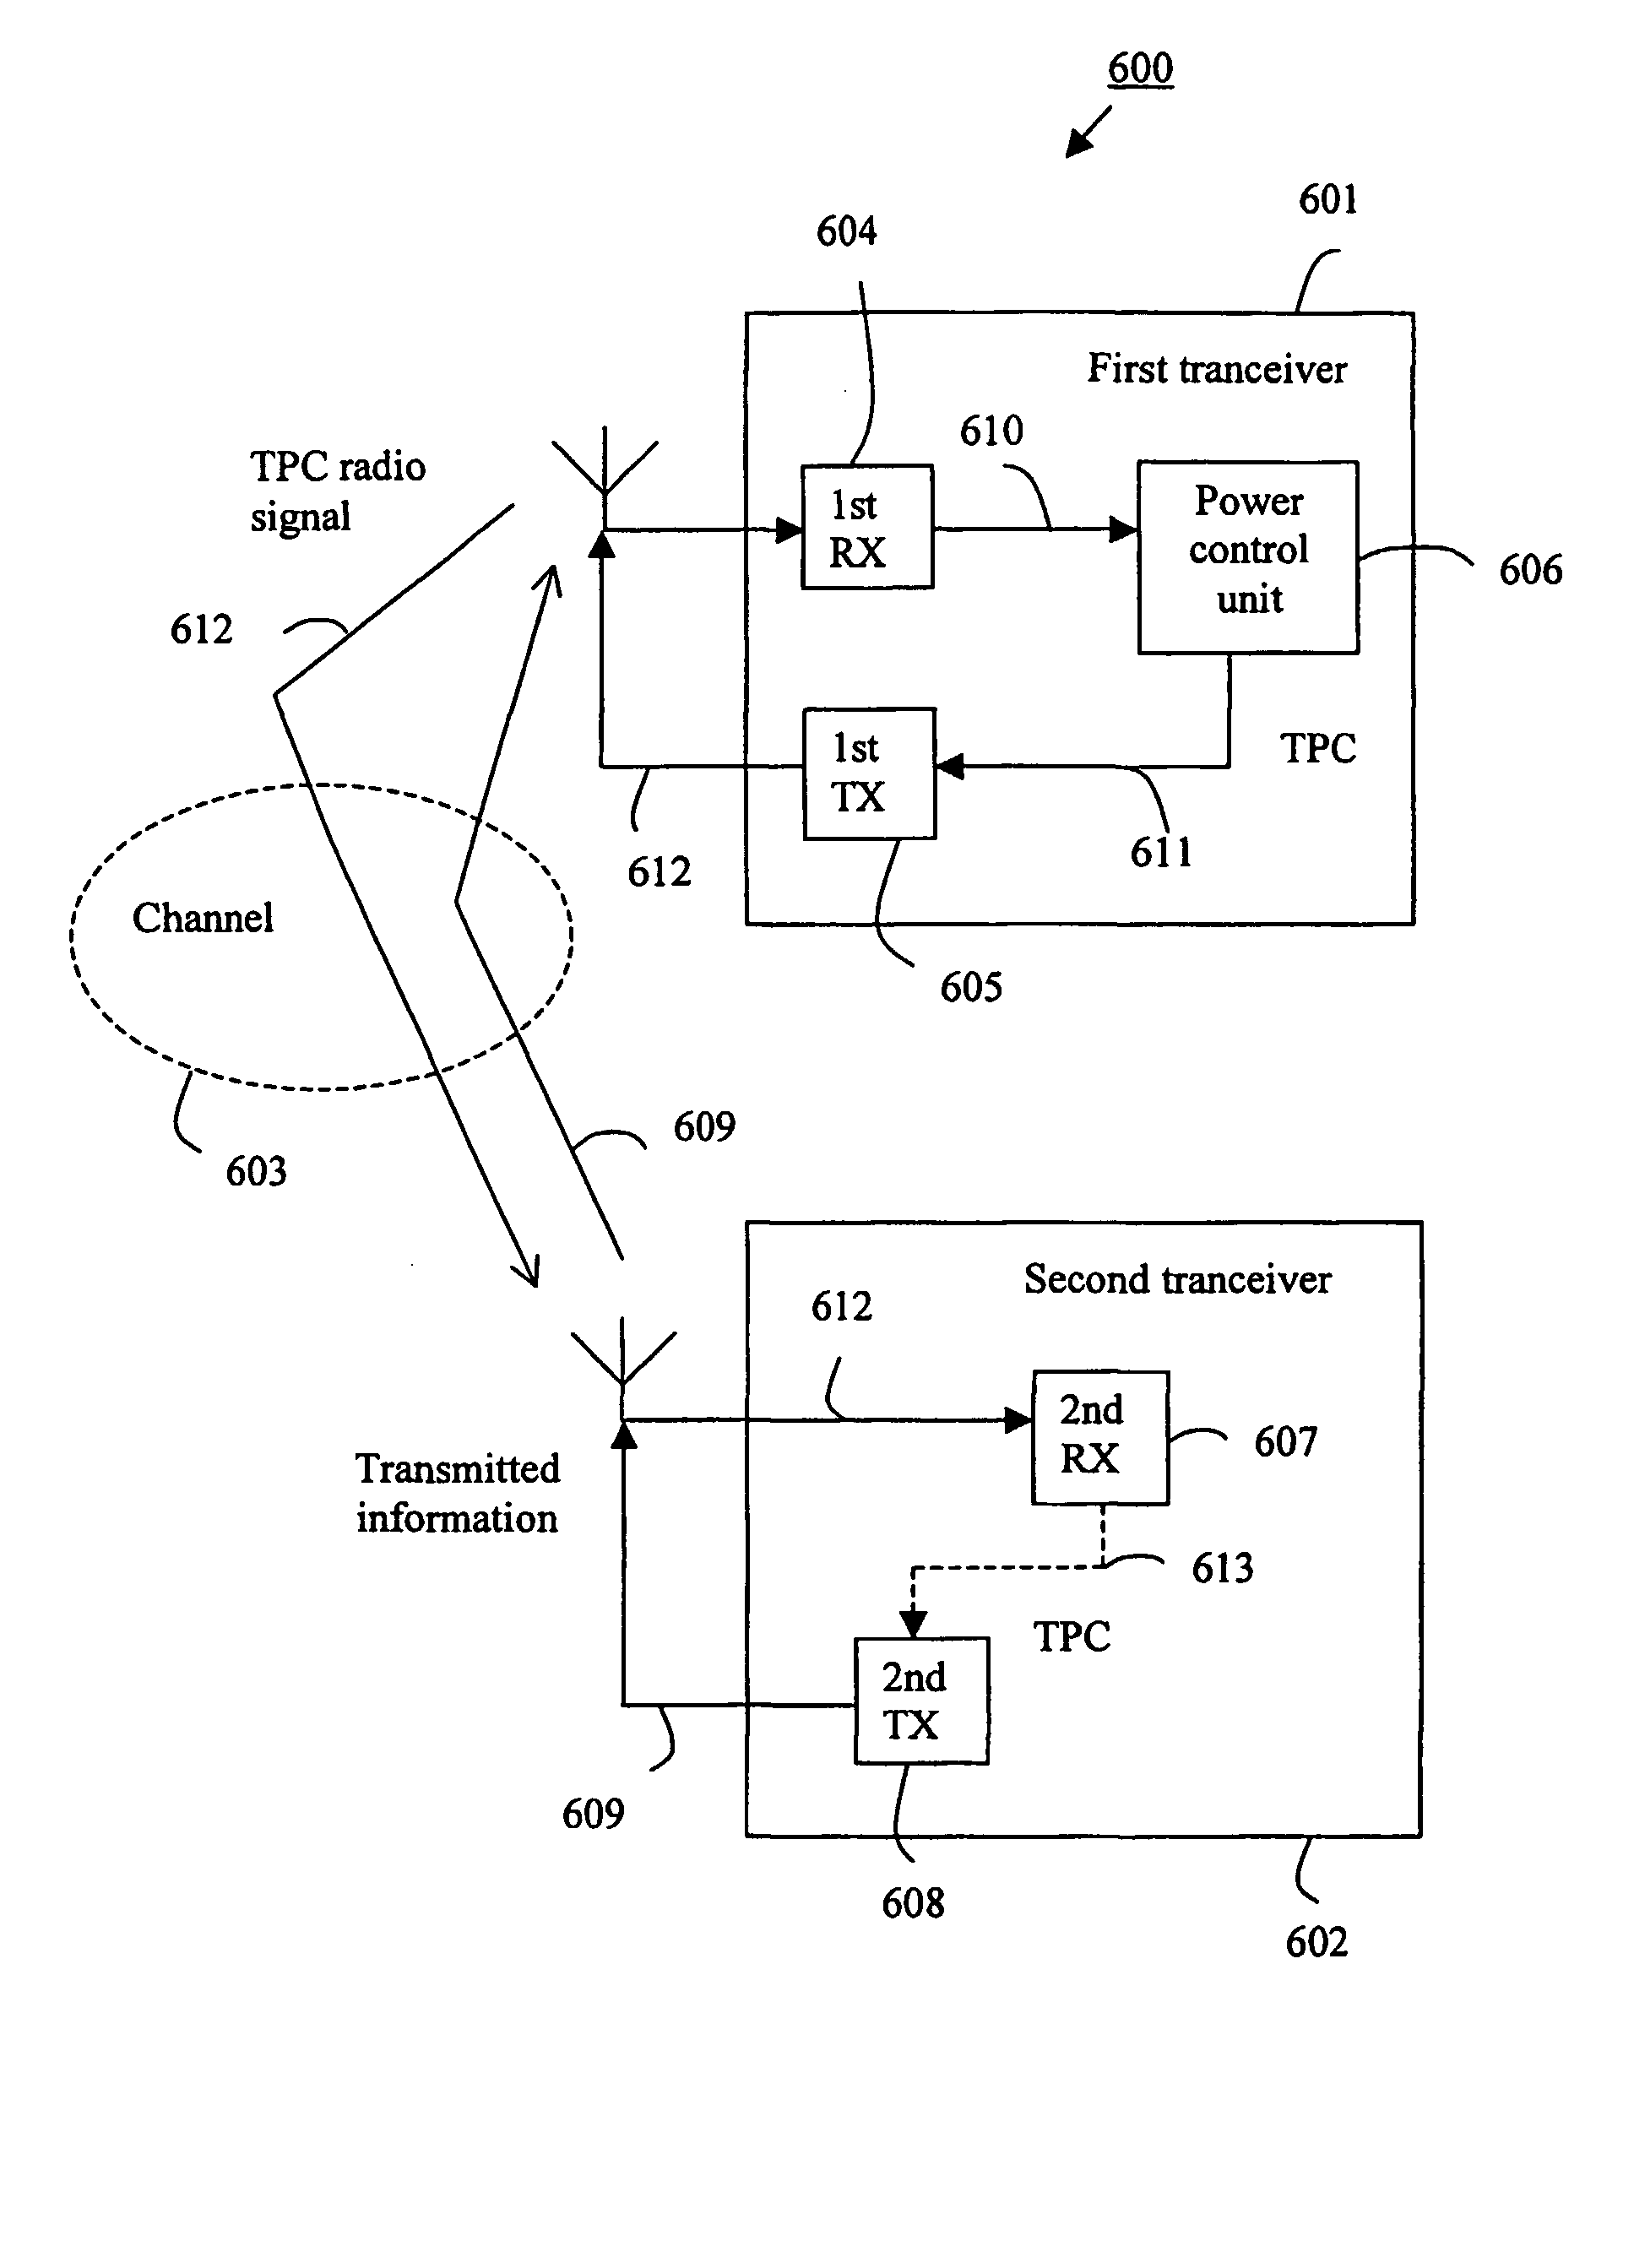 Power control in mobile radio communications systems